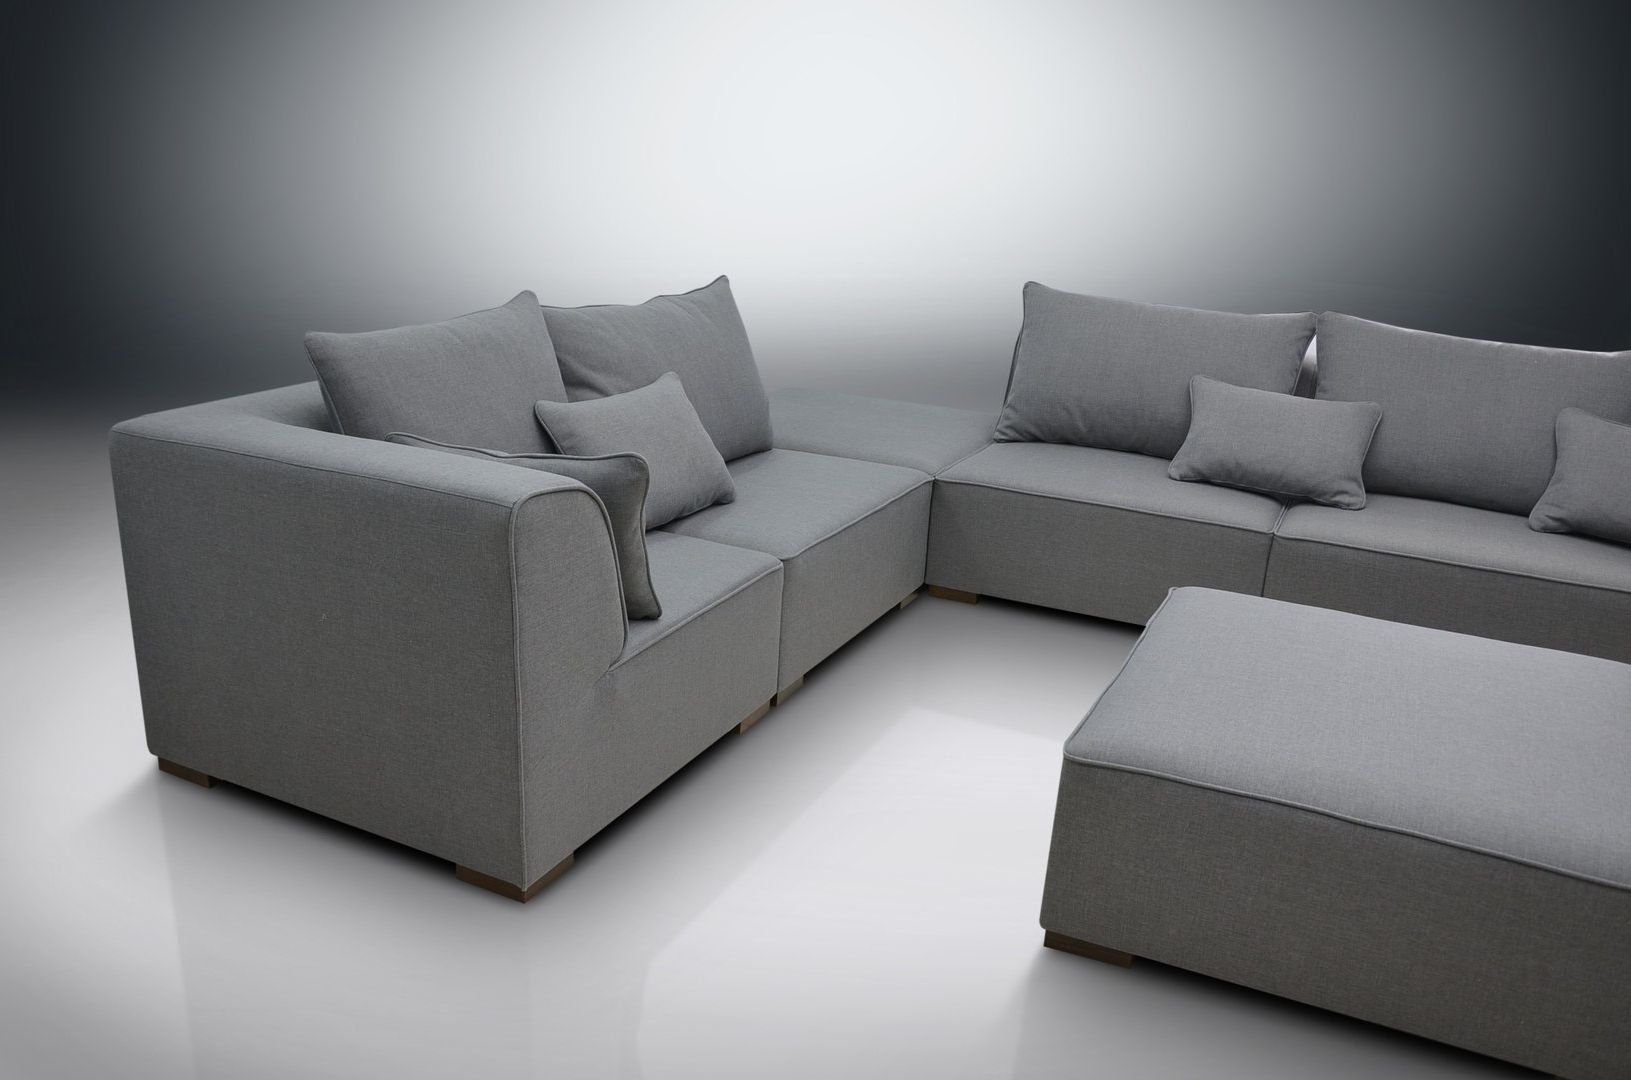 Trendy Dream Navy 2 Piece Modular Sofas For Modular Sofa Primo, 2xcorners, 3xchairs, 2xfootstools (View 8 of 20)